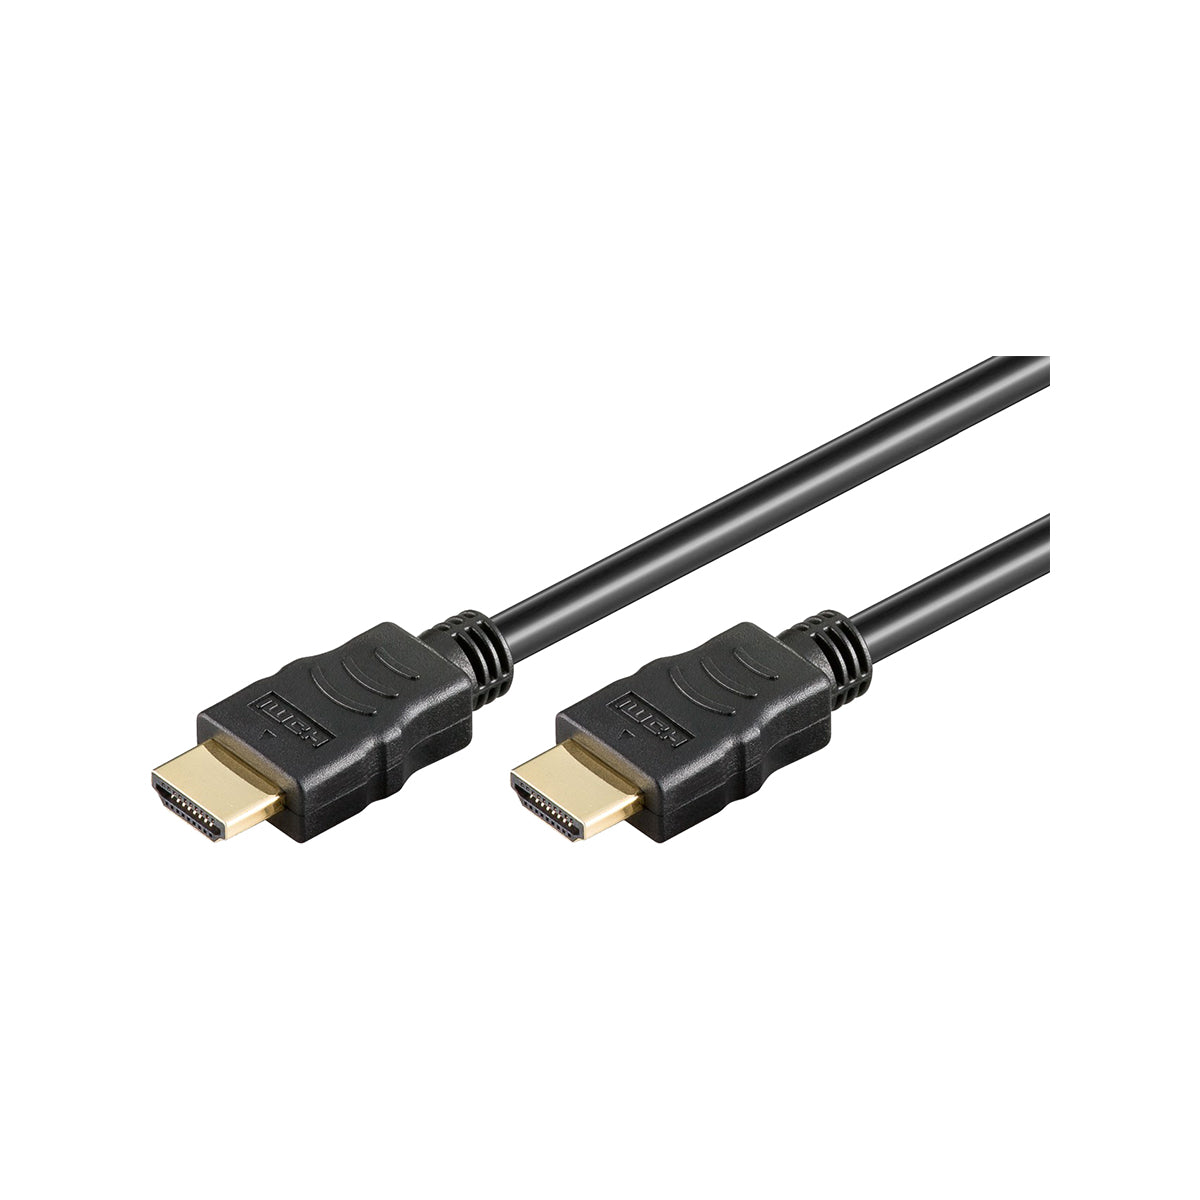 Goobay High Speed HDMI™ Cable with Ethernet (4K@60Hz) 2M for Laptops